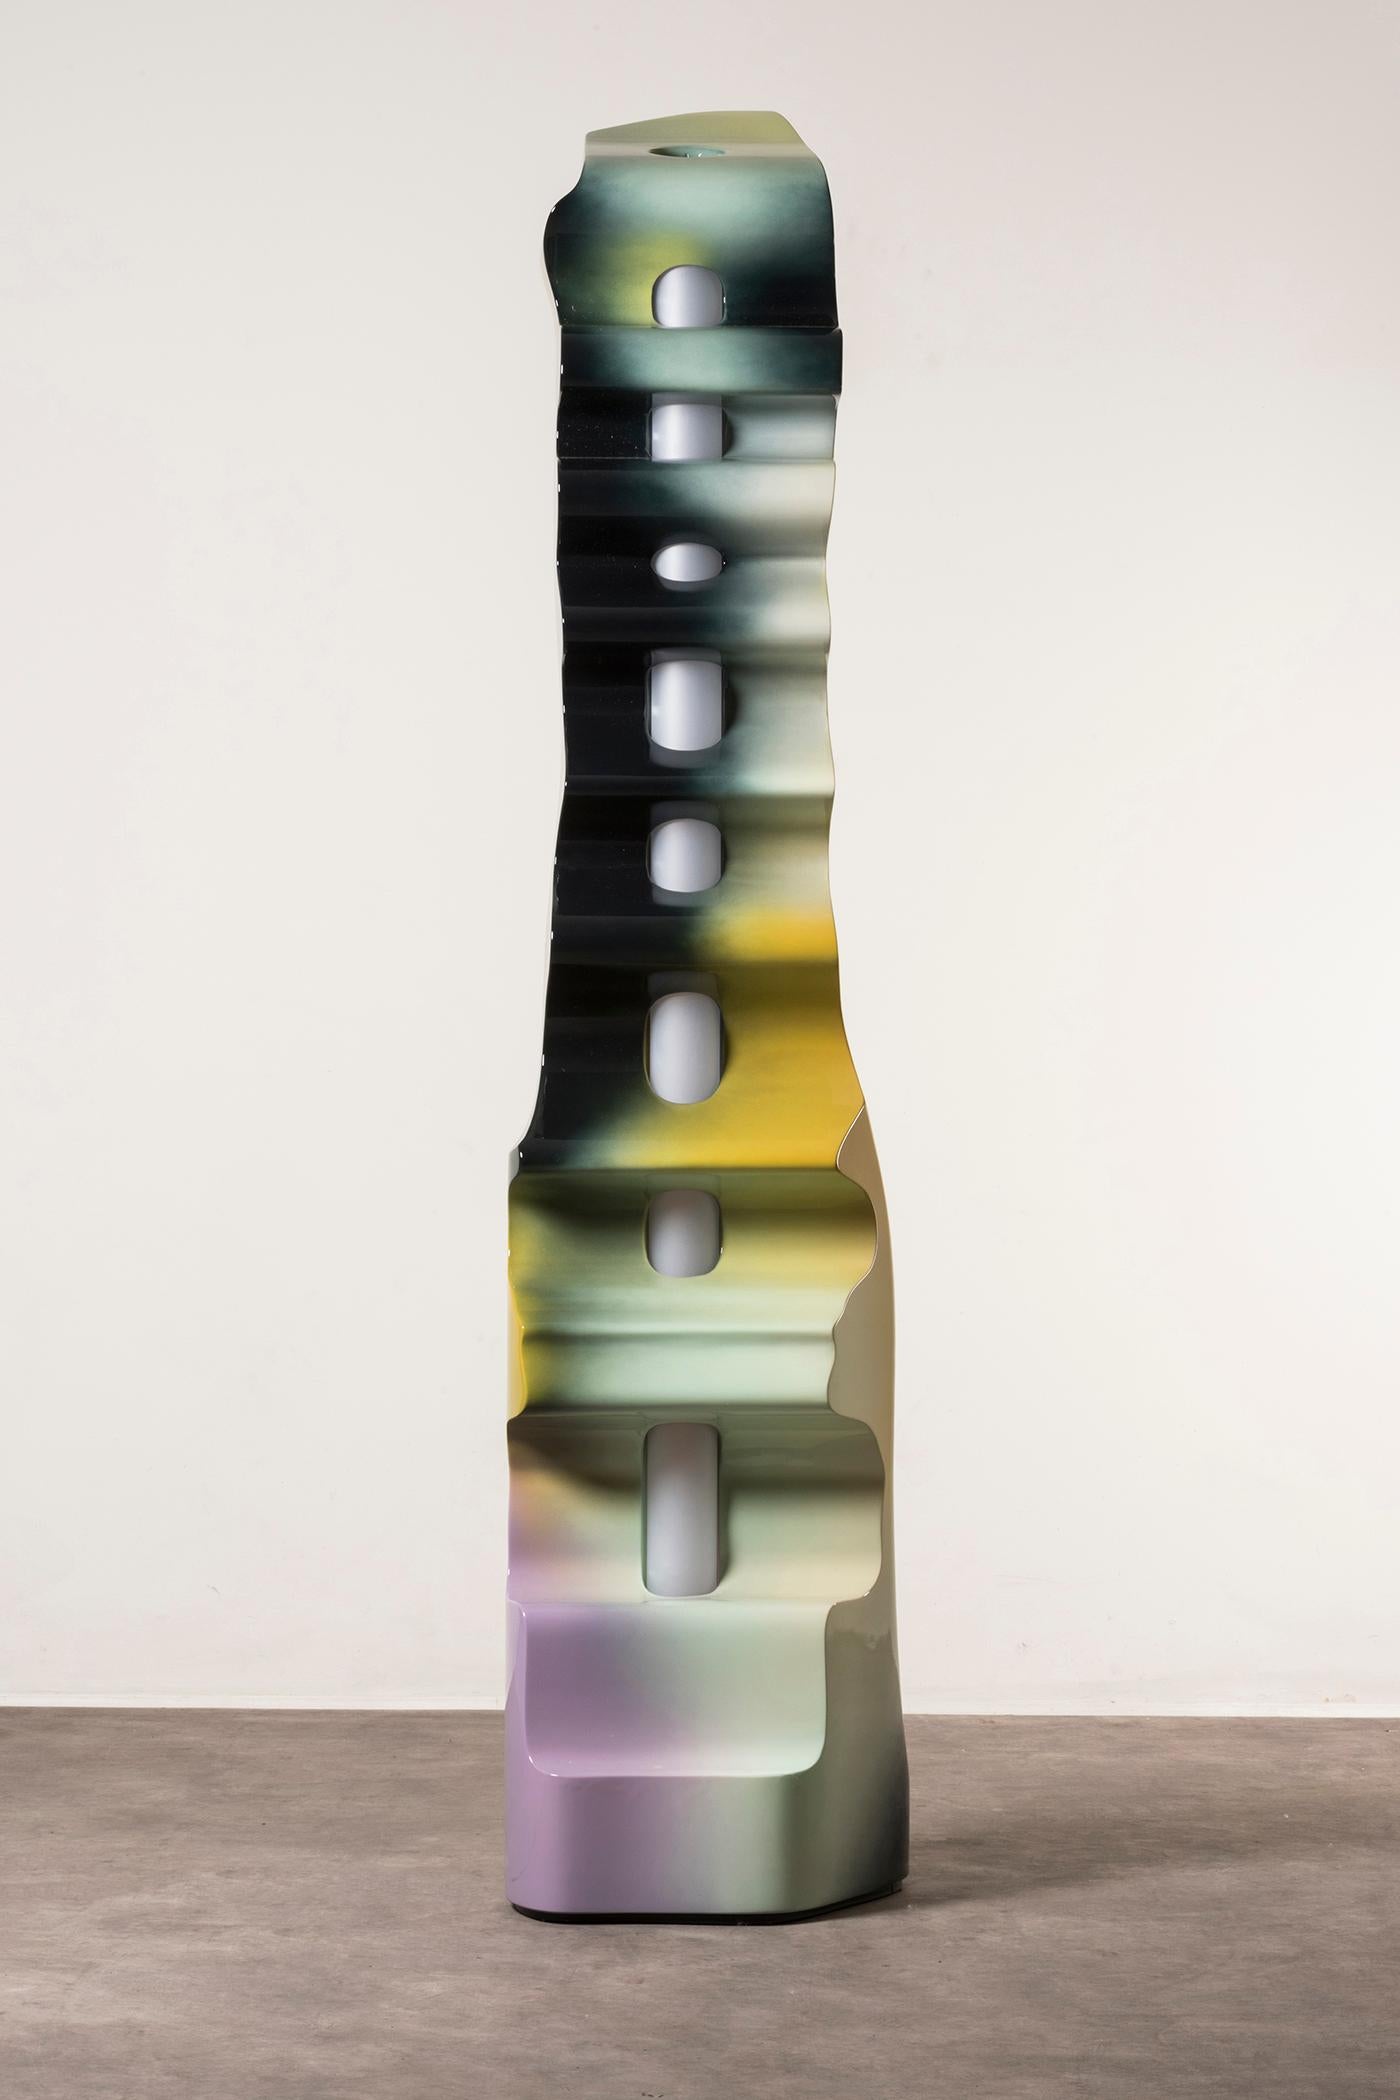 Guise Floor Lamp by Odd Matter, the Netherlands, 2019. Nilufar edition. EPS foam, spray. Measures: 47 x 45 x H 210 cm, 18.5 x 17.7 x H 82.6 in. Guise explores the first encounter? Through the potential of spray painting.? Surfaces protect what is